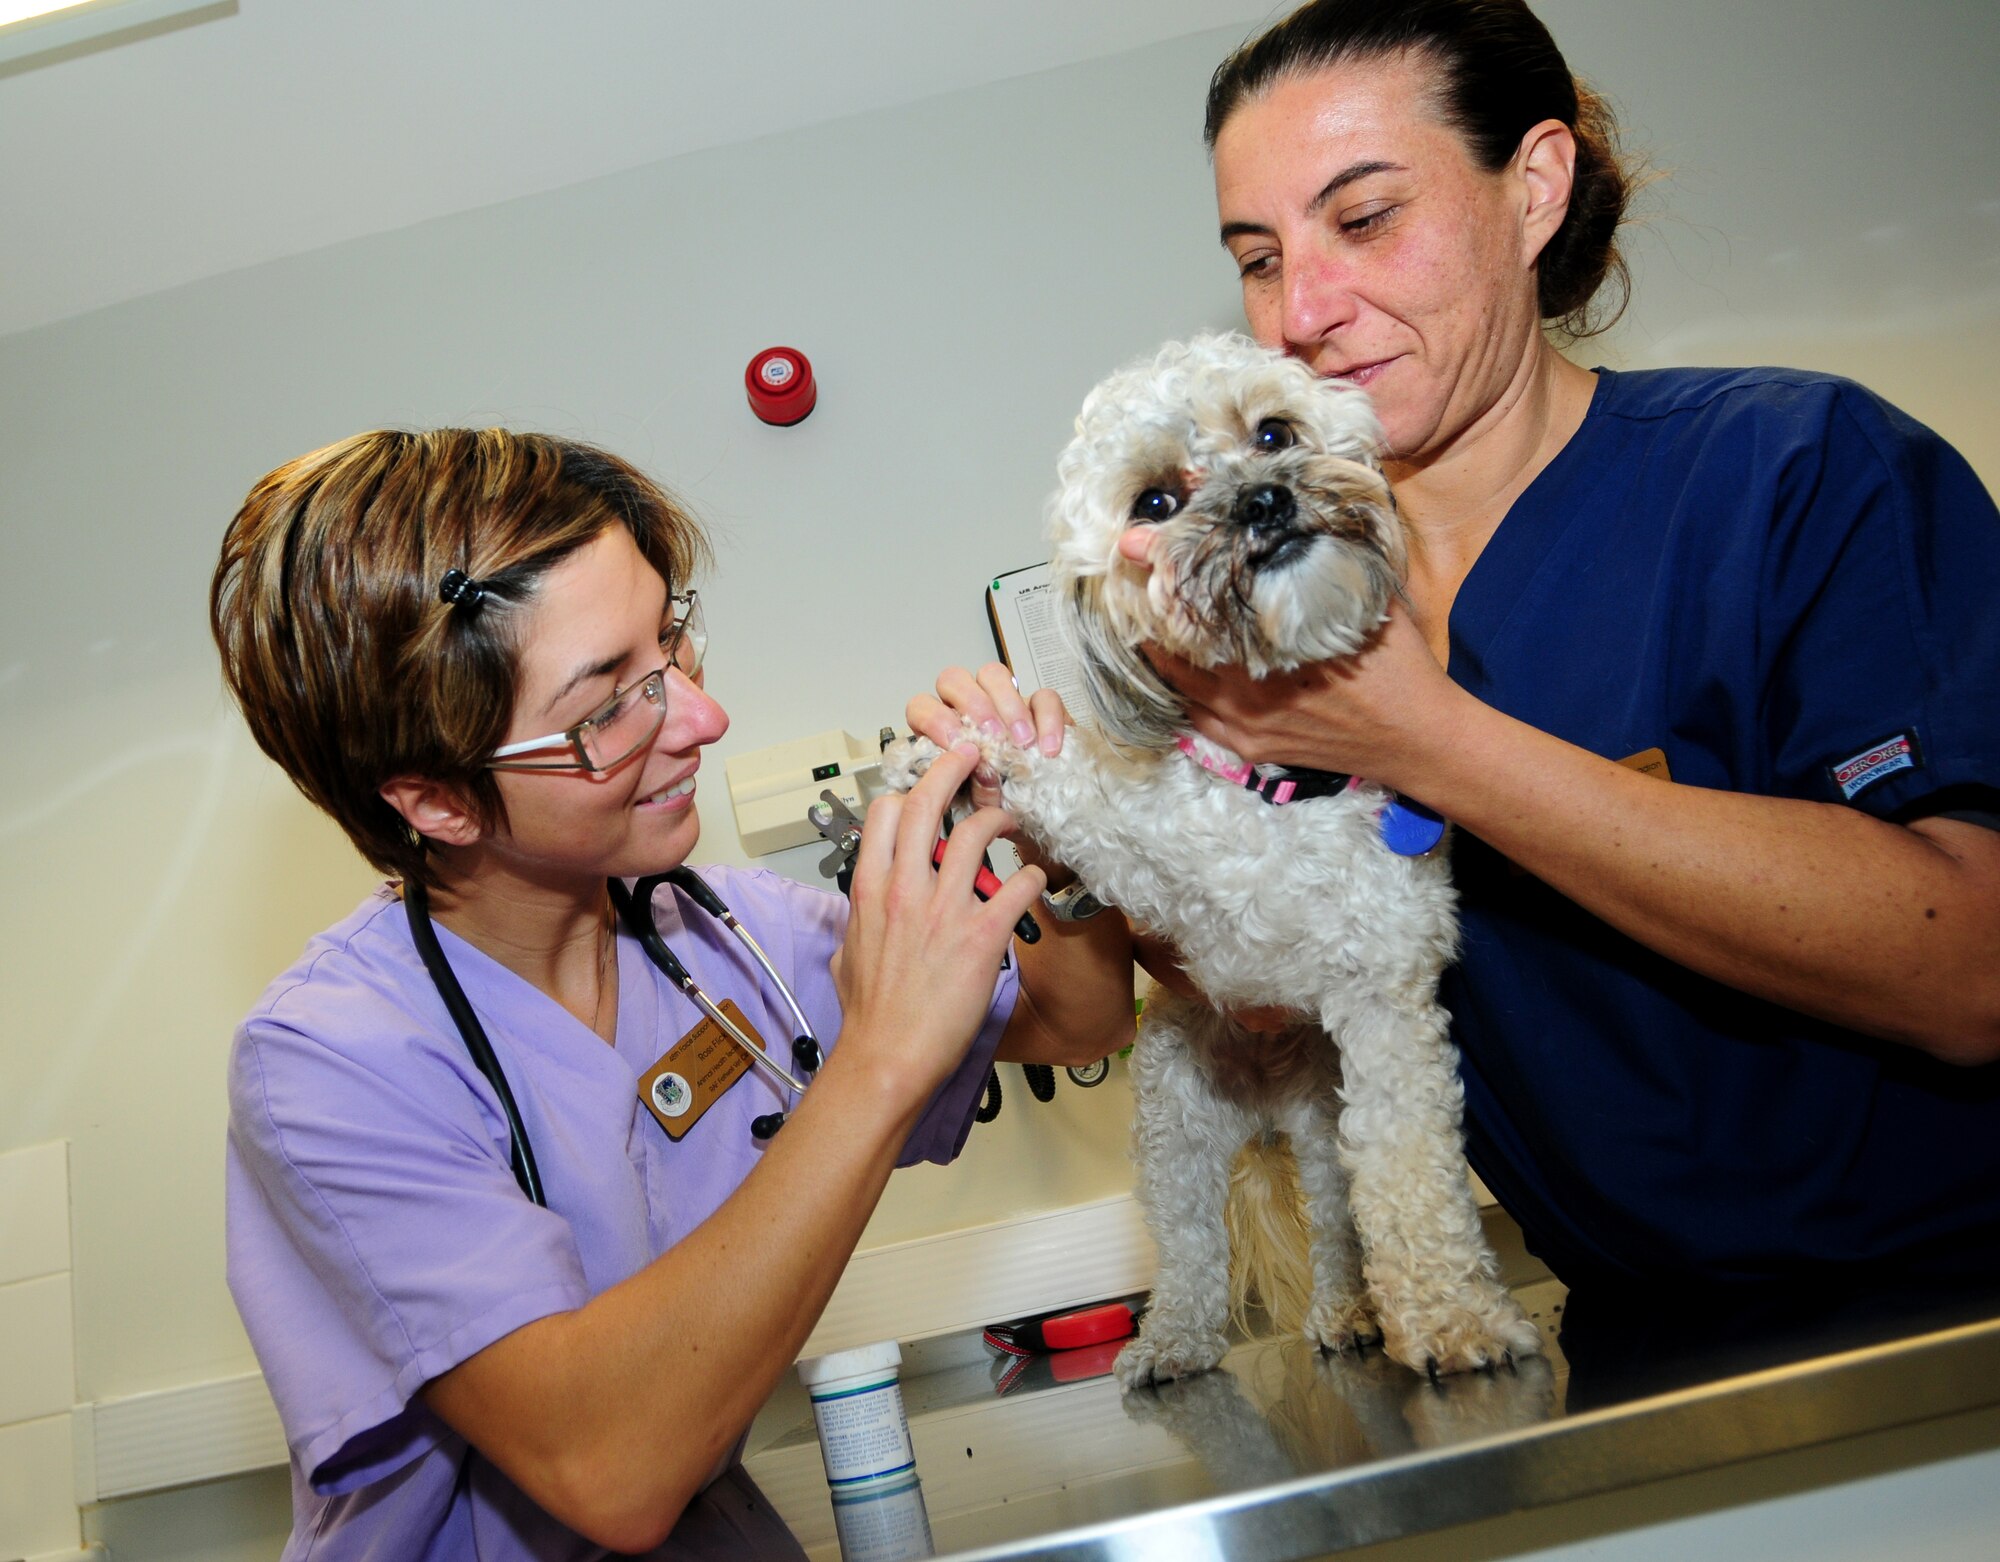 ROYAL AIR FORCE FELTWELL, England –Ross Flick, RAF Feltwell Veterinary Clinic animal health technician, clips Cherry the yorkie’s nails while being held by Dariela Iacopini, RAF Feltwell Veterinary Clinic veterinarian, during an appointment Sept. 13, 2012. The Veterinary Clinic provides medical care to pets of servicemembers from all across England, as well as providing care to military working dogs. (U.S. Air Force photo by Airman 1st Class Cory D. Payne)